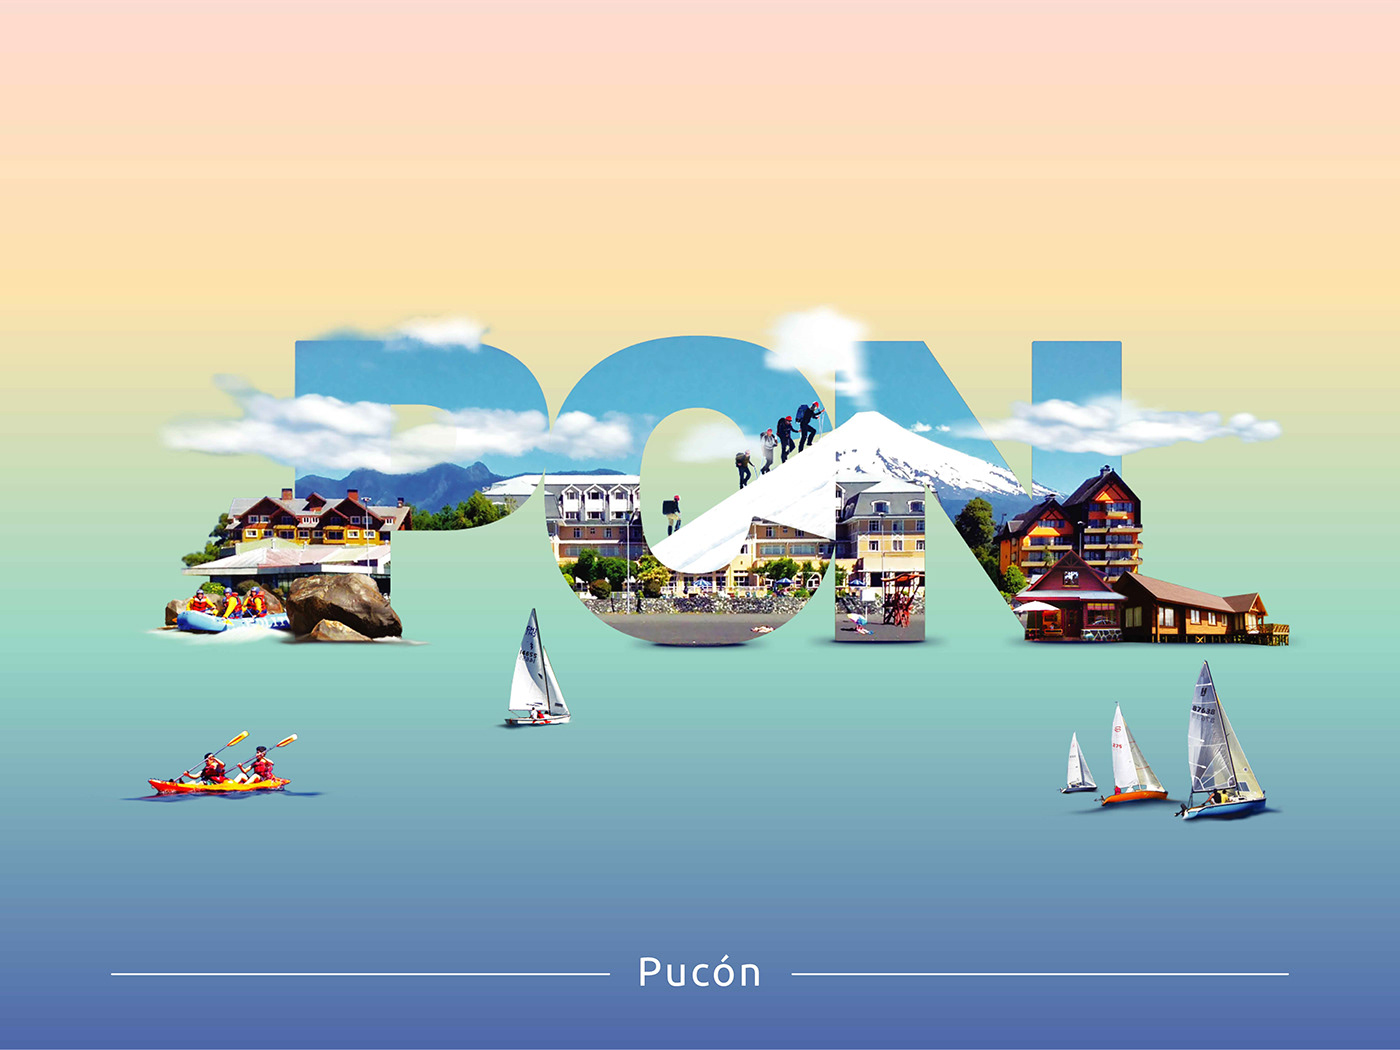 postcard of Pucón, a city from the south of Chile. 